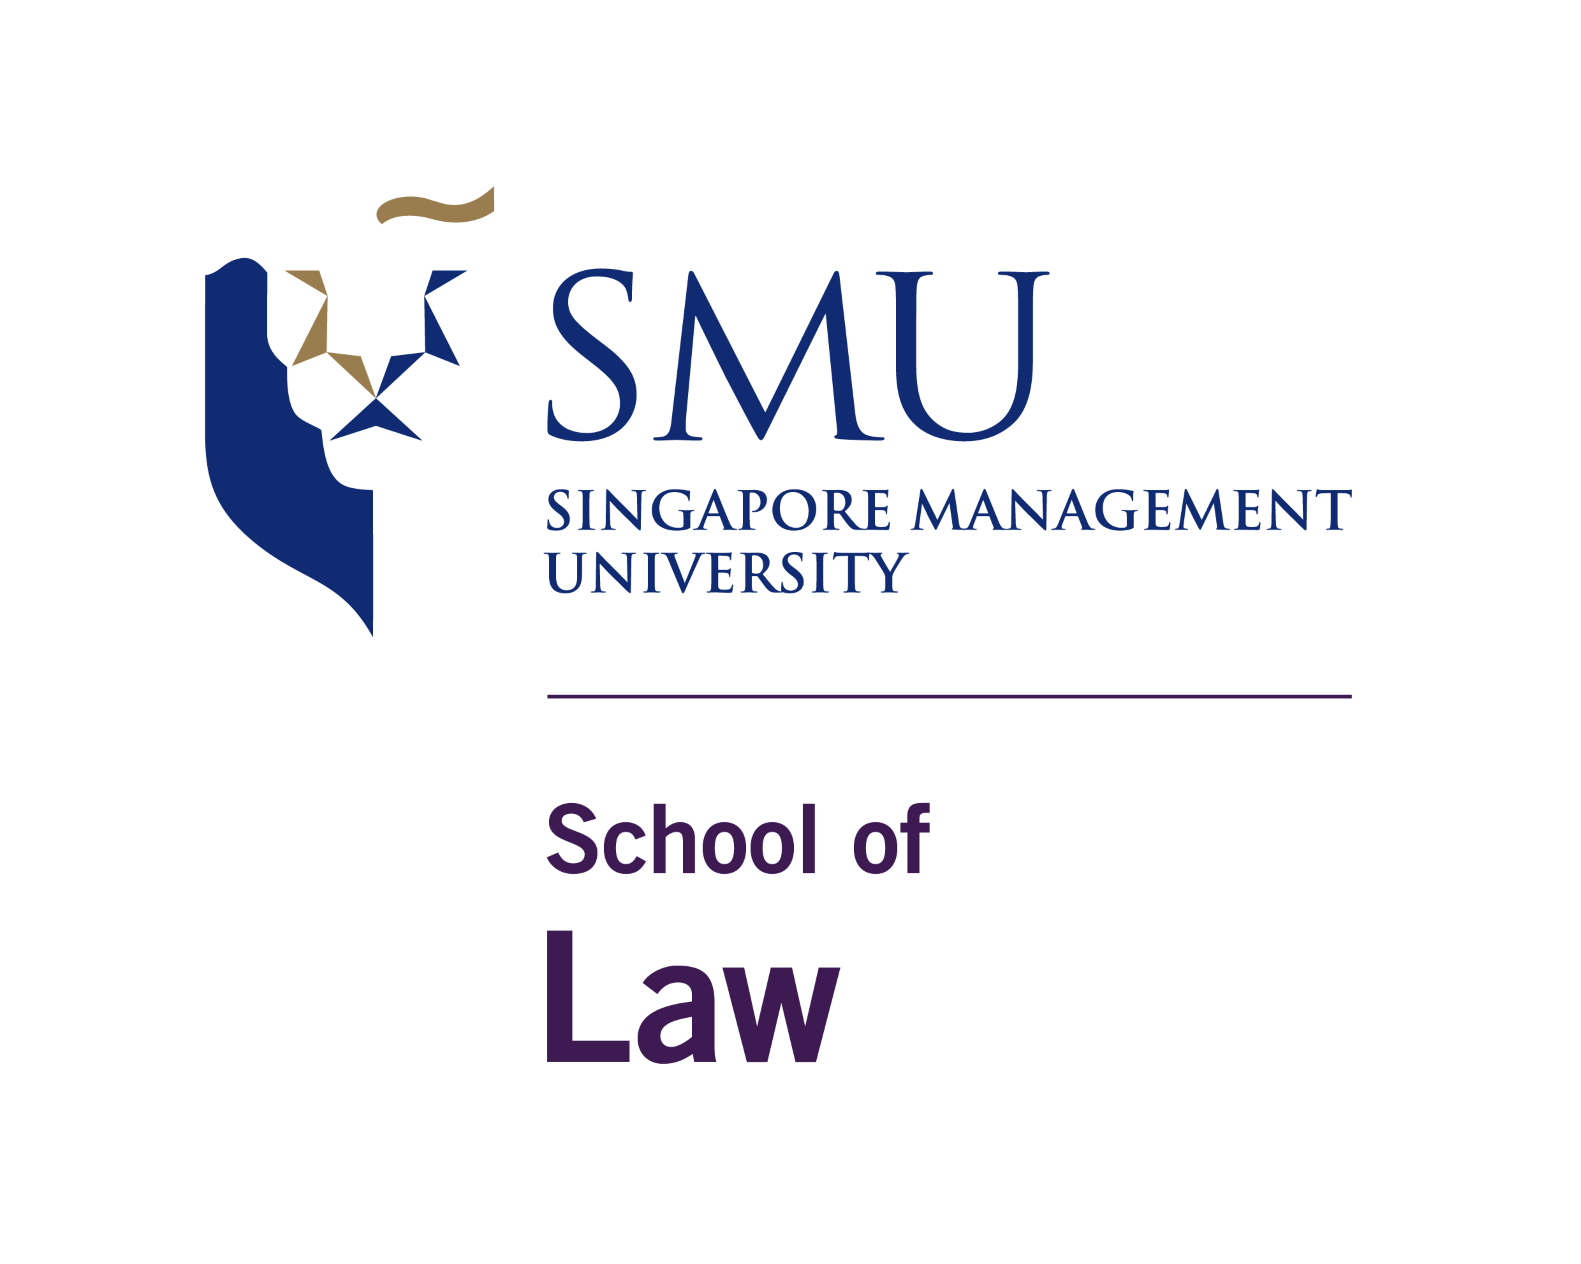 School of Law Most Popular Papers (Oct 2018-Jan 2019)